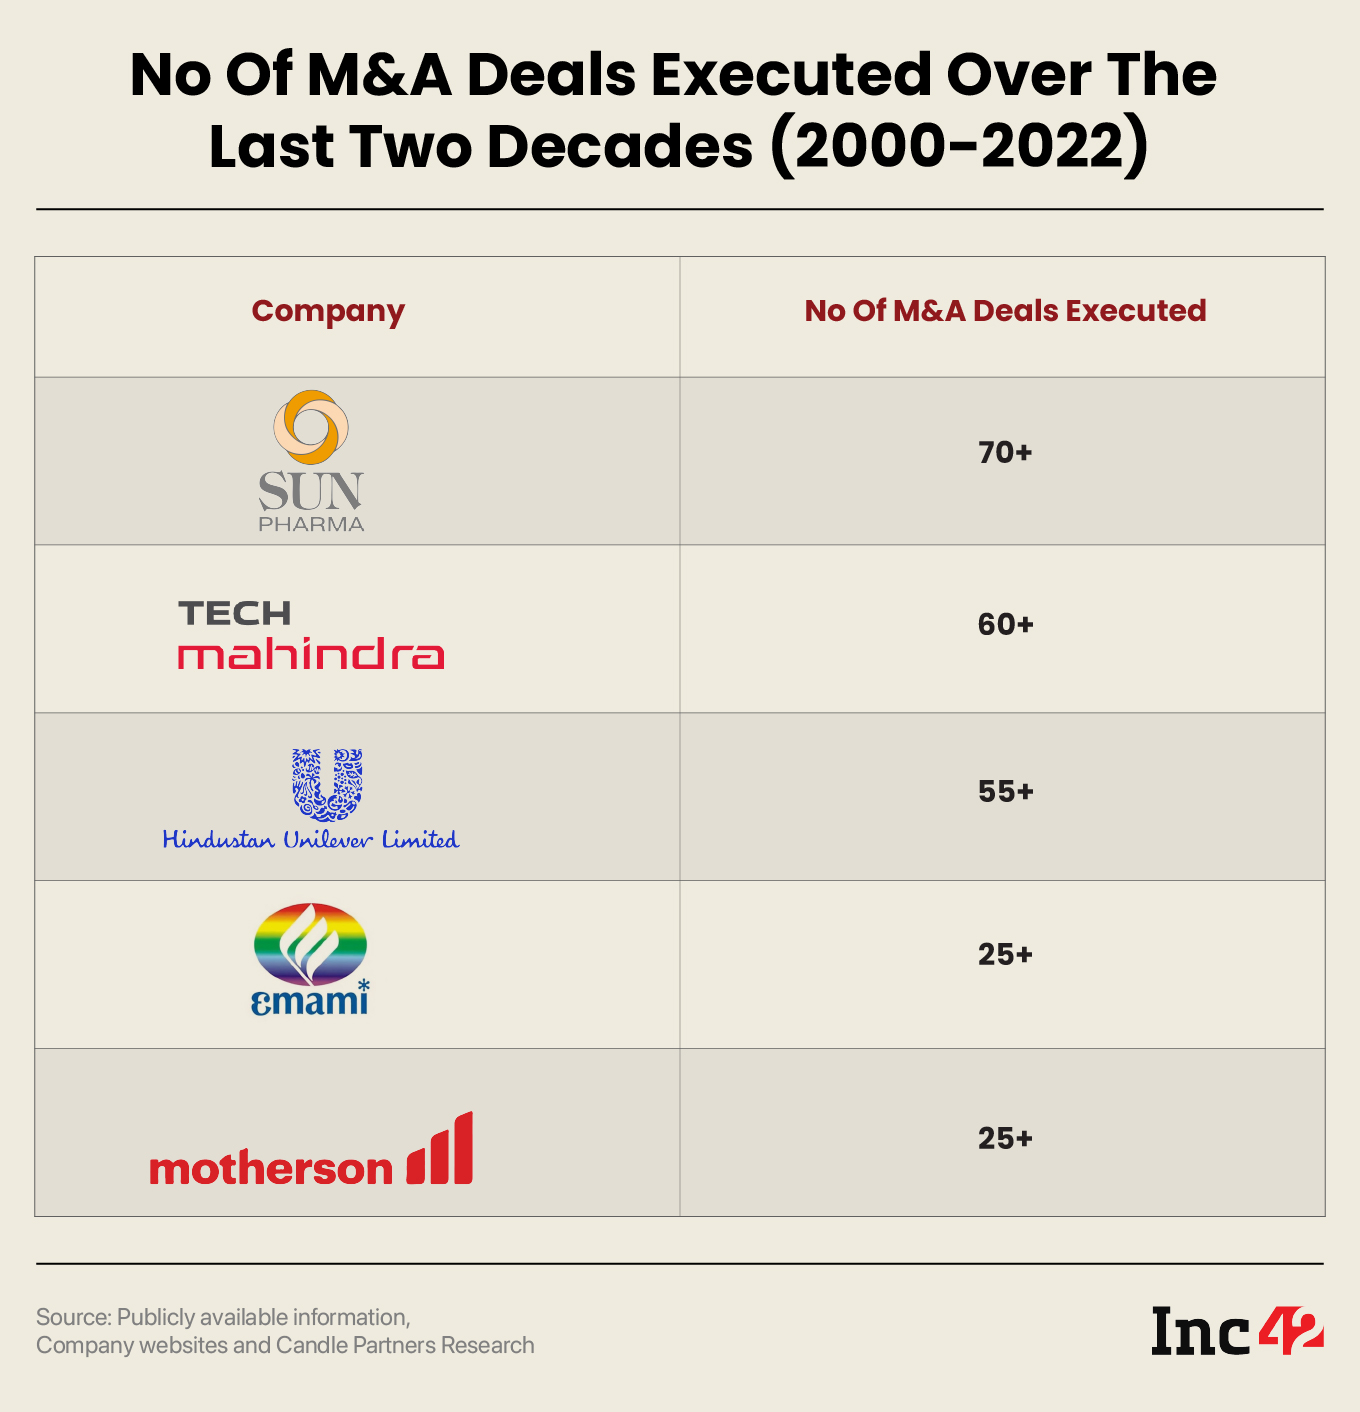 No Of M&A Deals Executed Over The Last Two Decades (2000-2022)